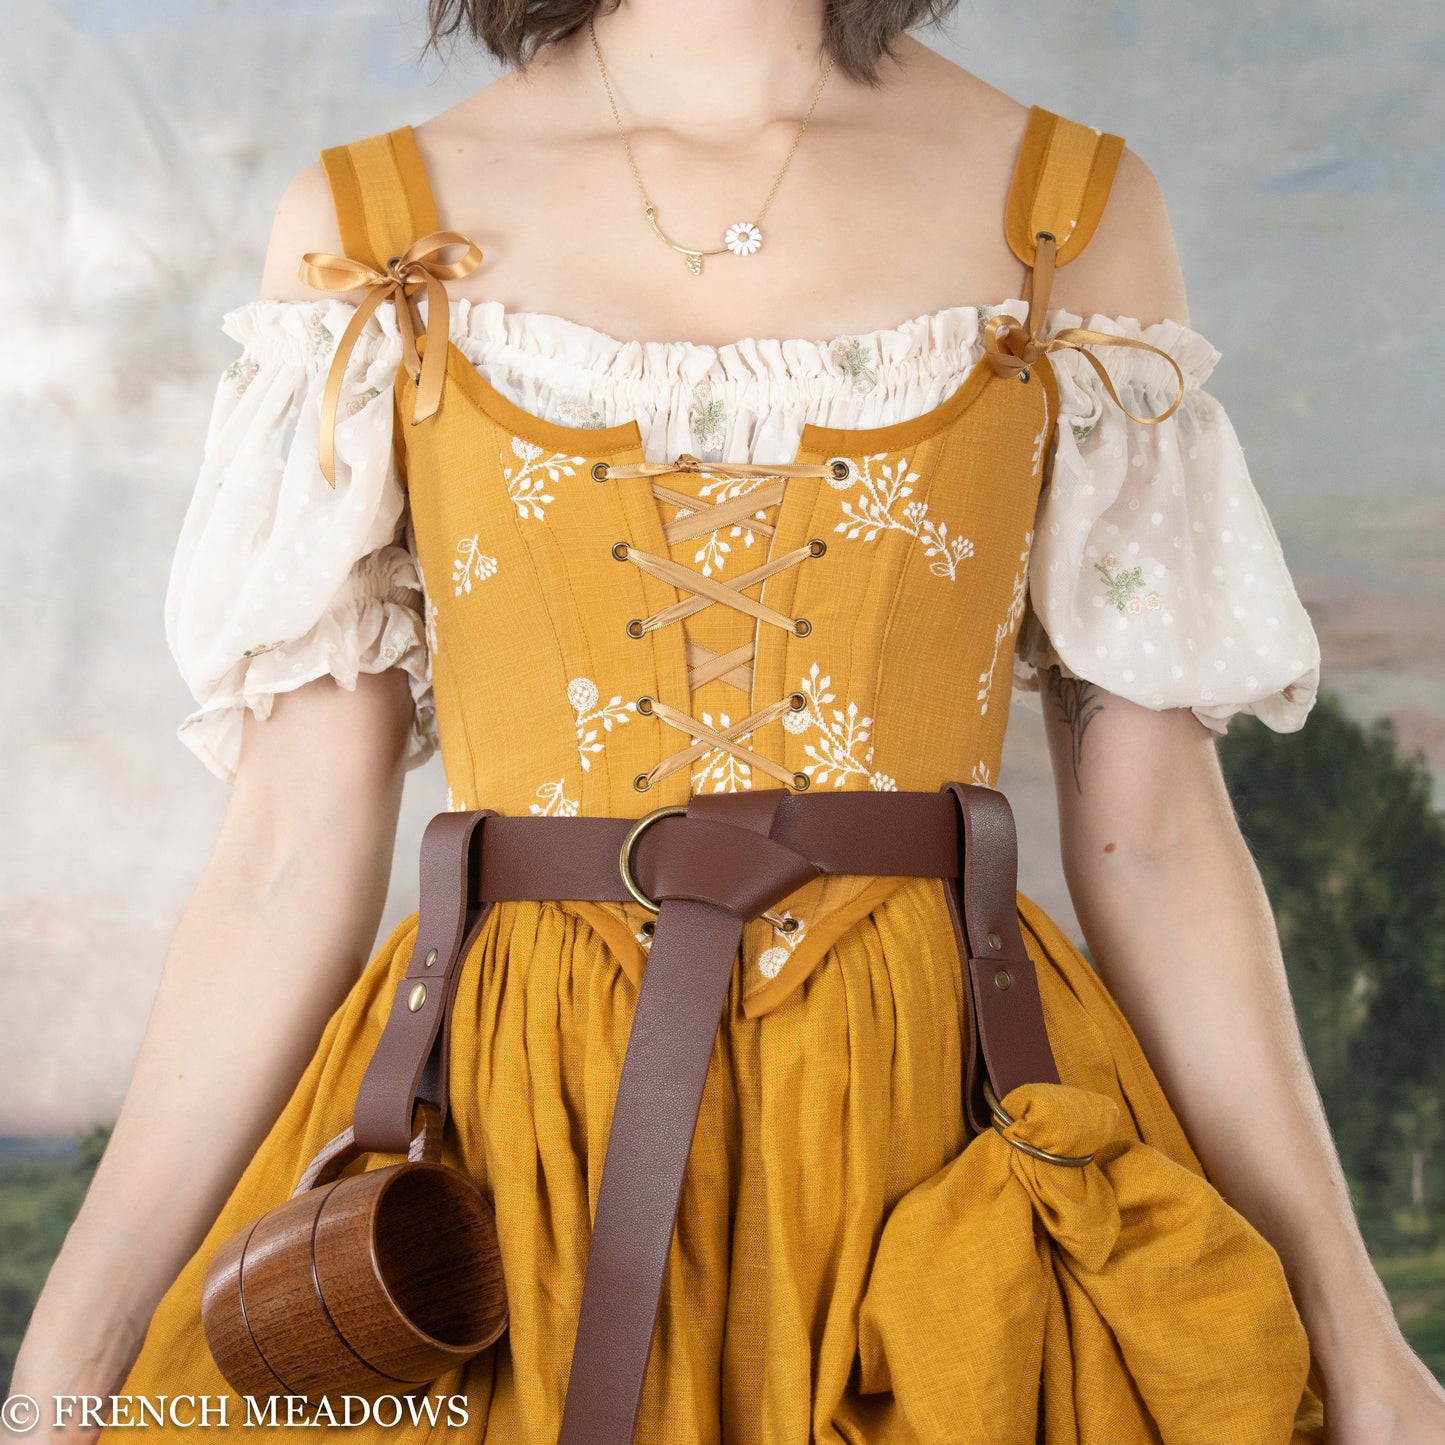 model wearing a renaissance faire costume with a yellow corset, skirt, and leather belt accessories for the renaissance faire